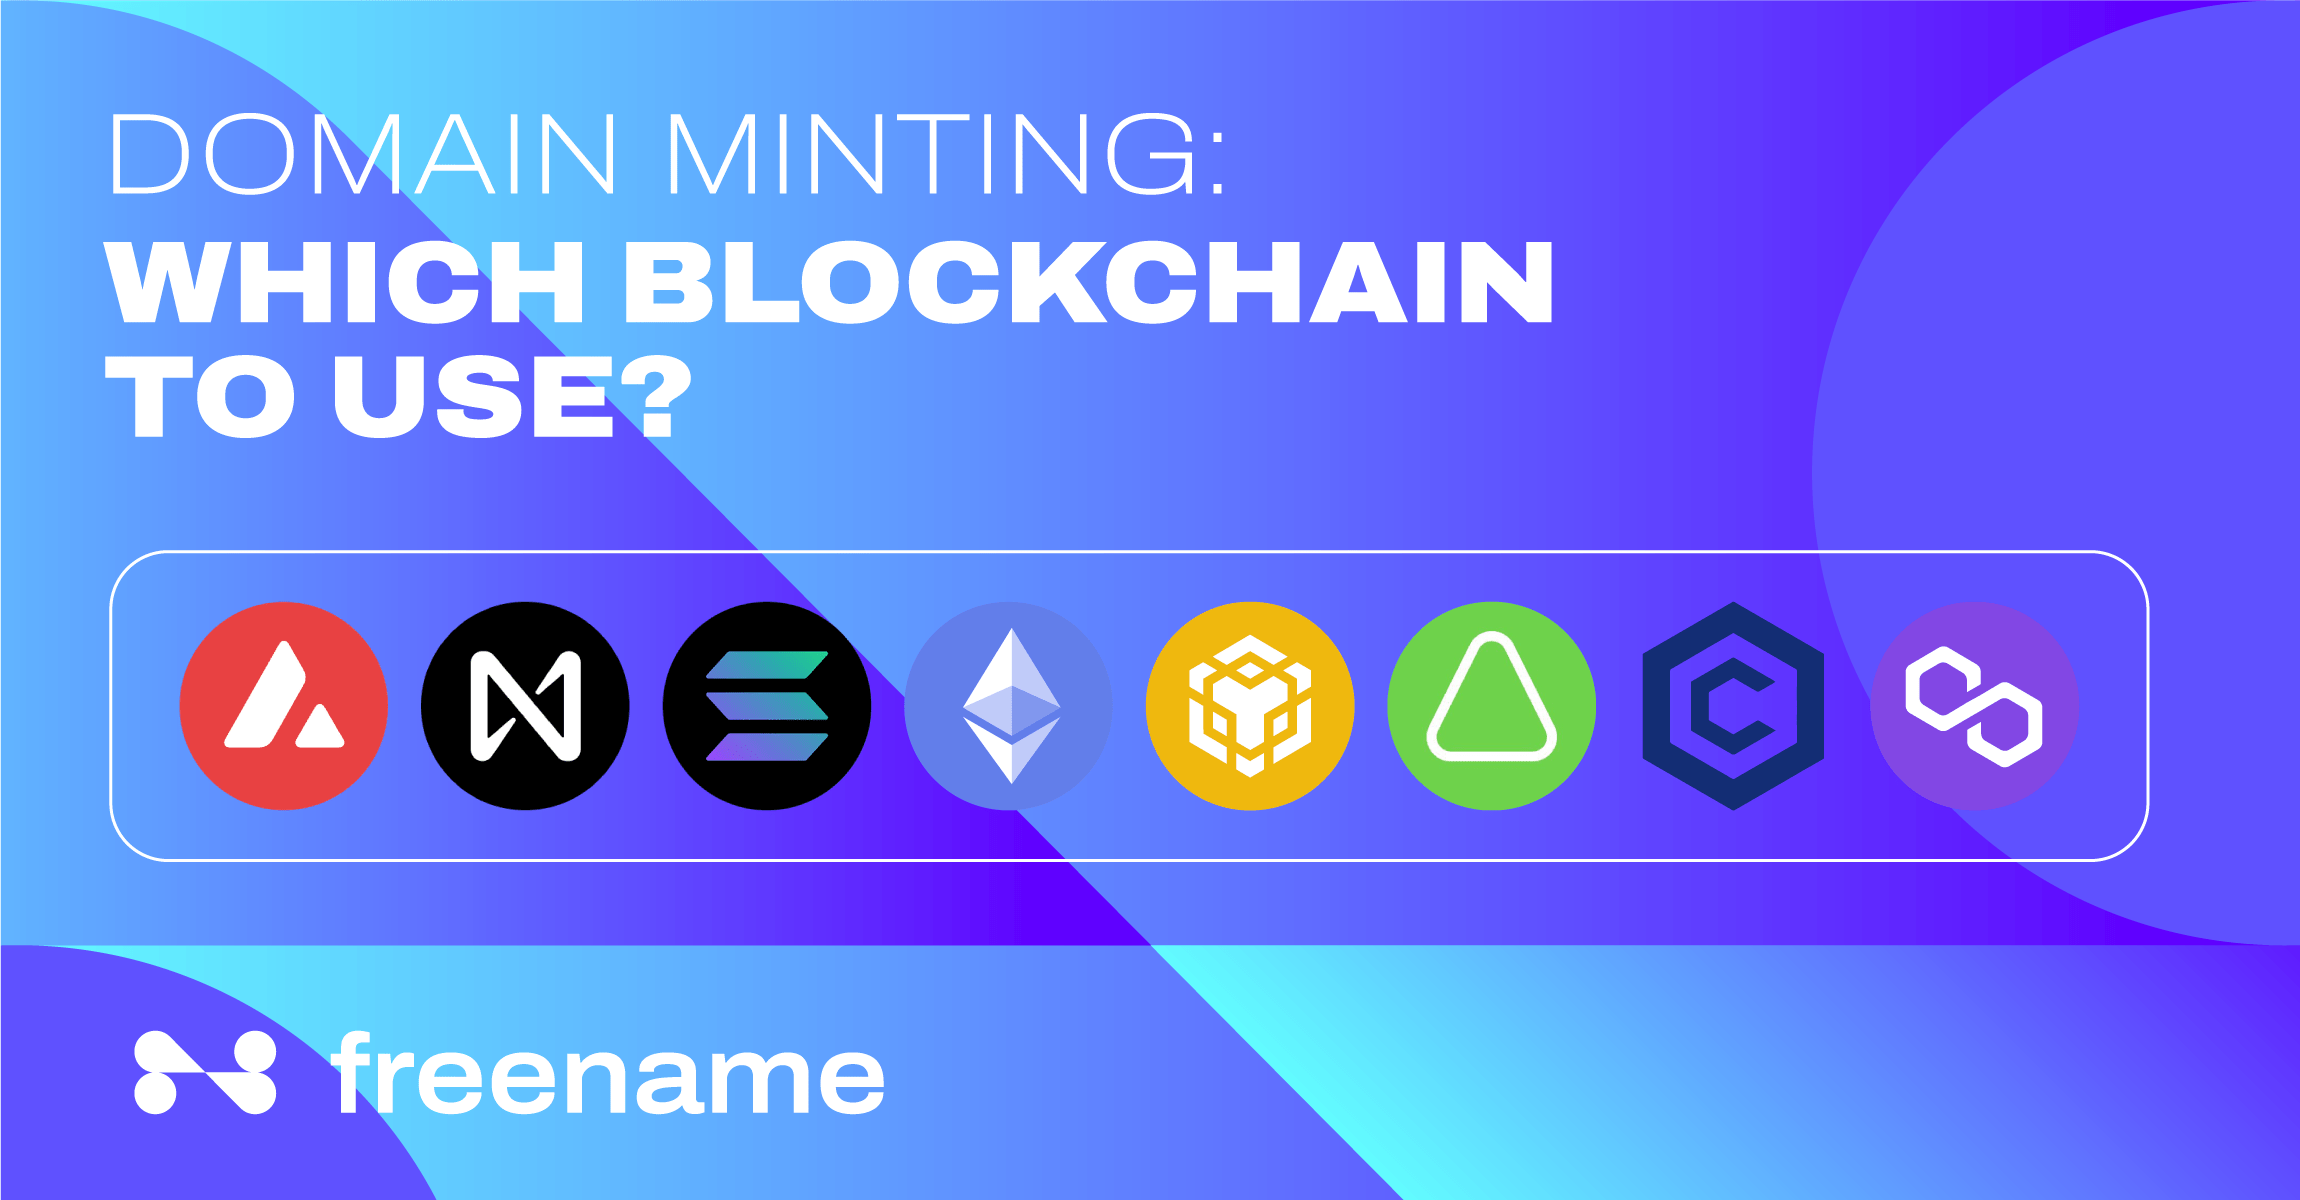 Domain Minting: Which Blockchain to Use?